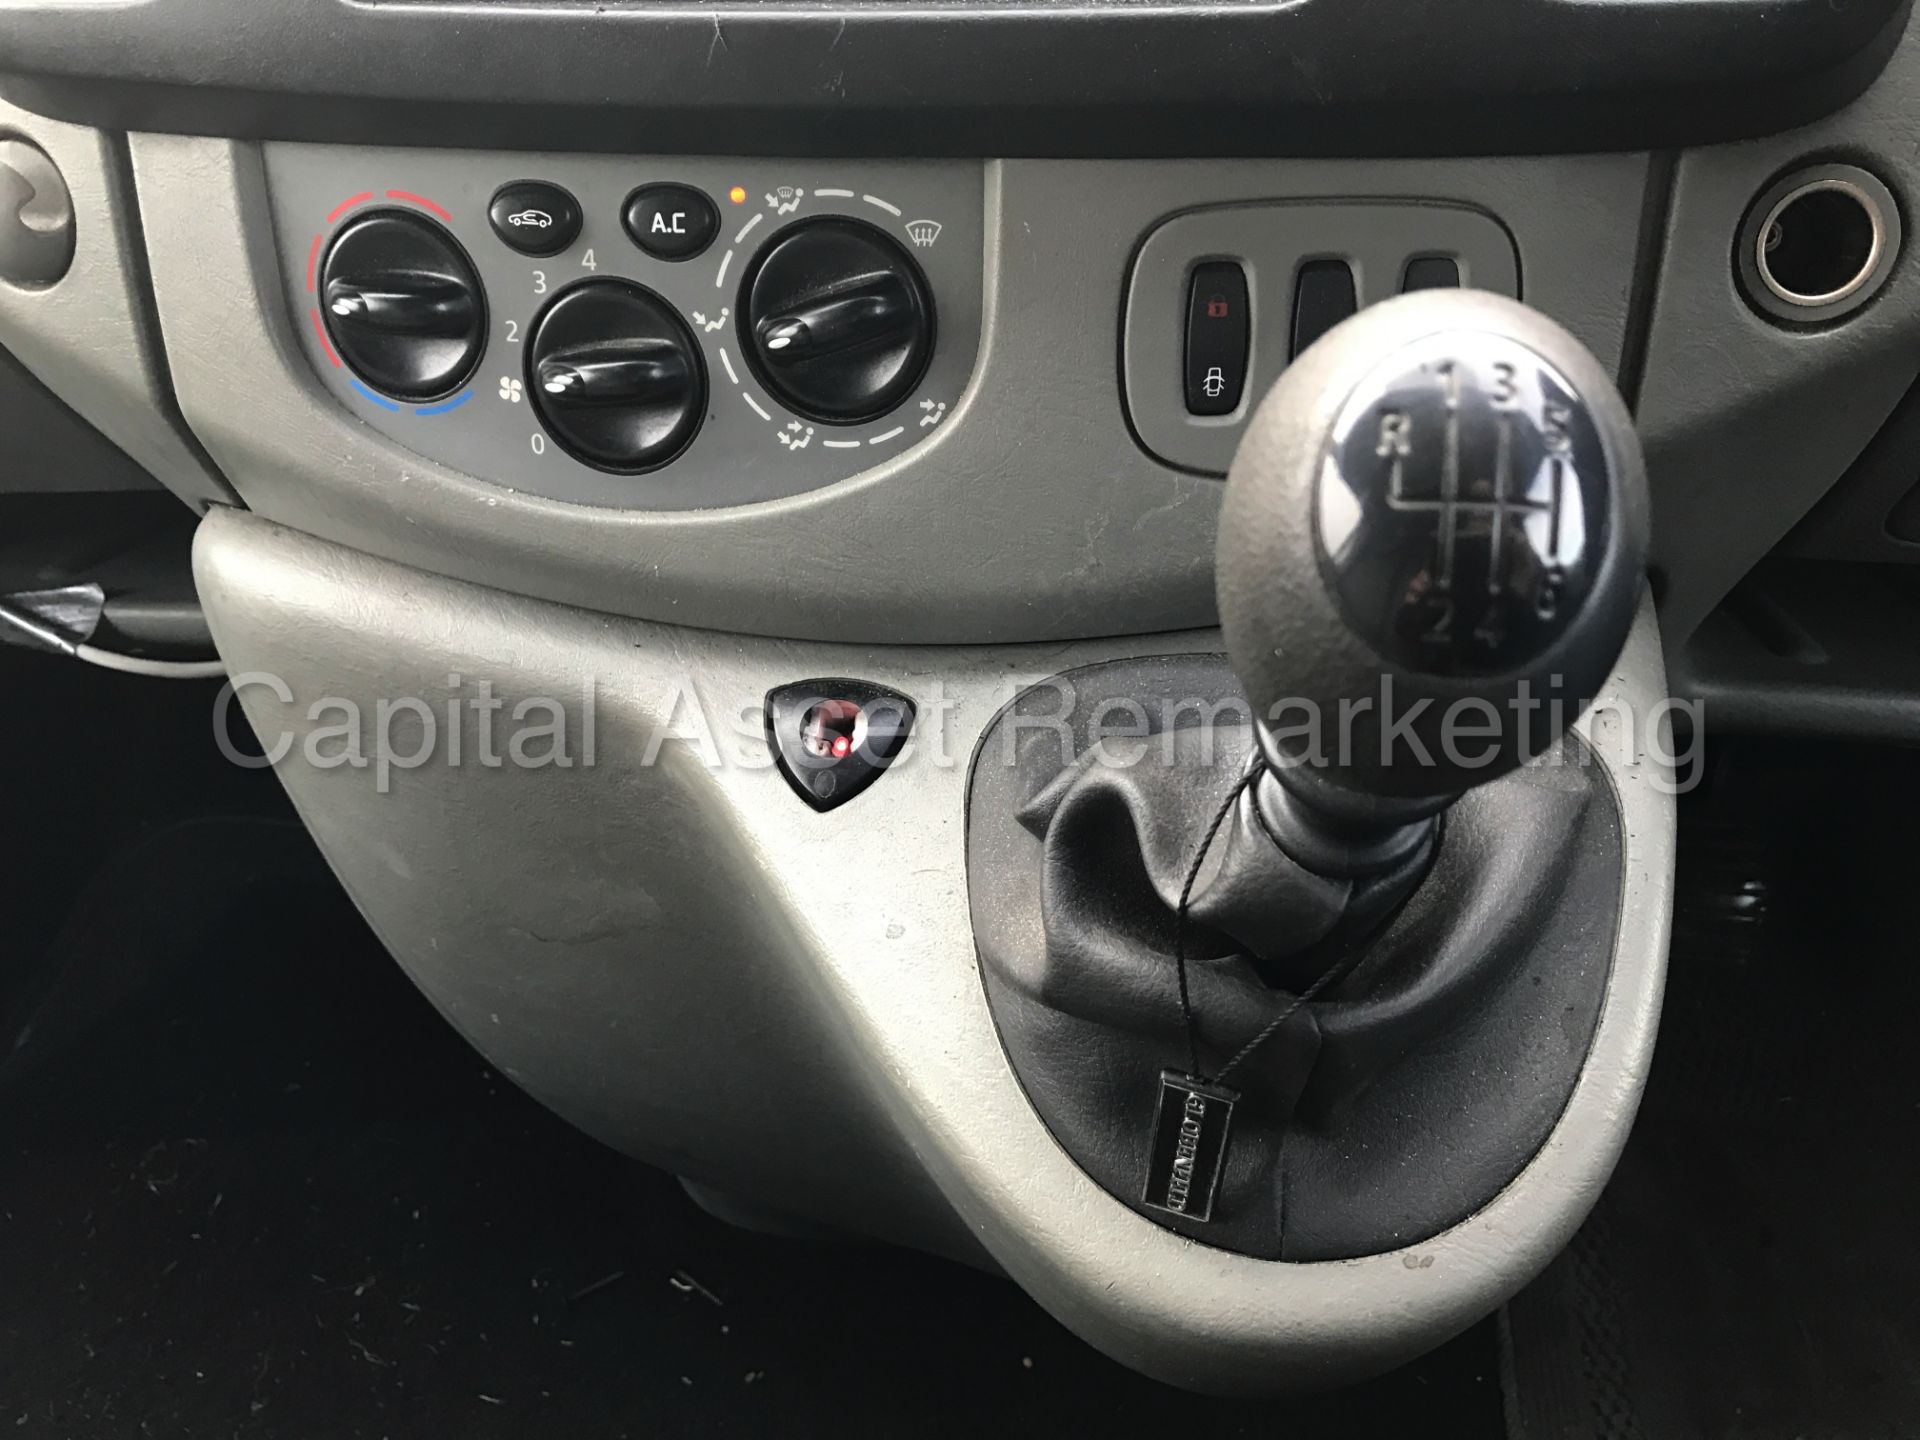 RENAULT TRAFIC LL29 DCI 115 (2010 MODEL) '2.0 DCI - 115 PS - 6 SPEED - LWB' **AIR CON** - Image 11 of 20